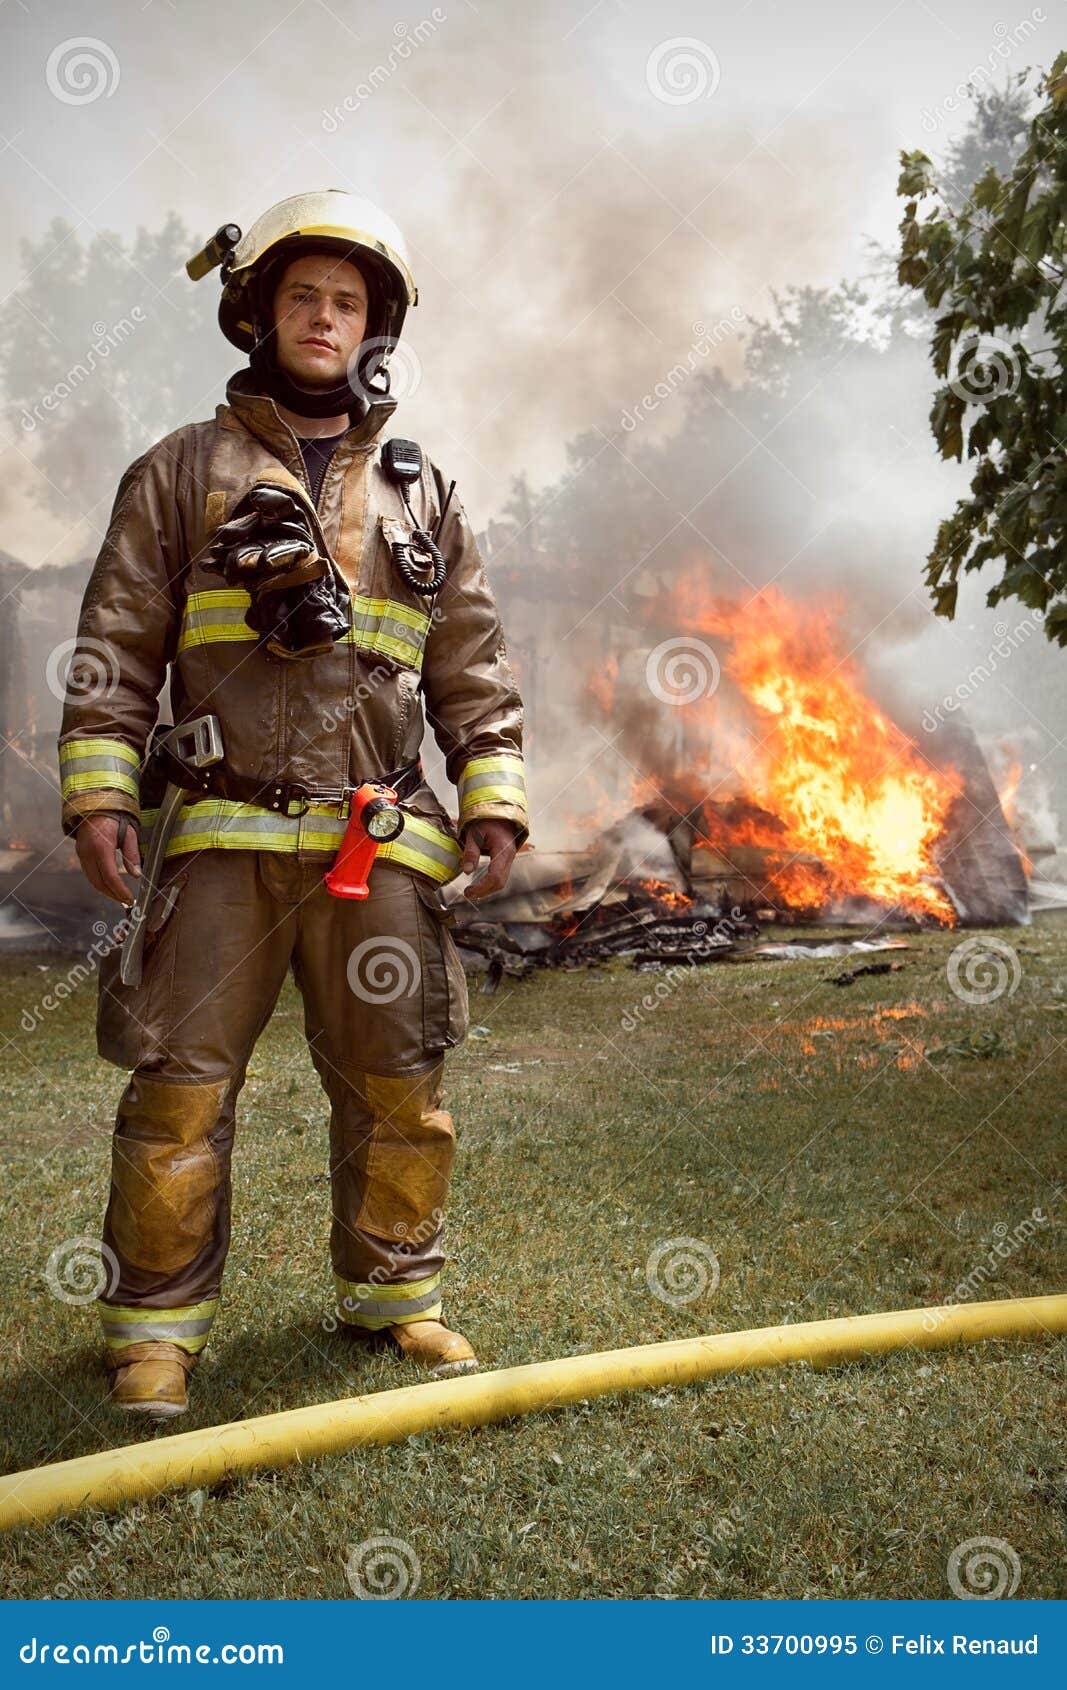 Real Firefighter With House On Fire In Background Royalty ...